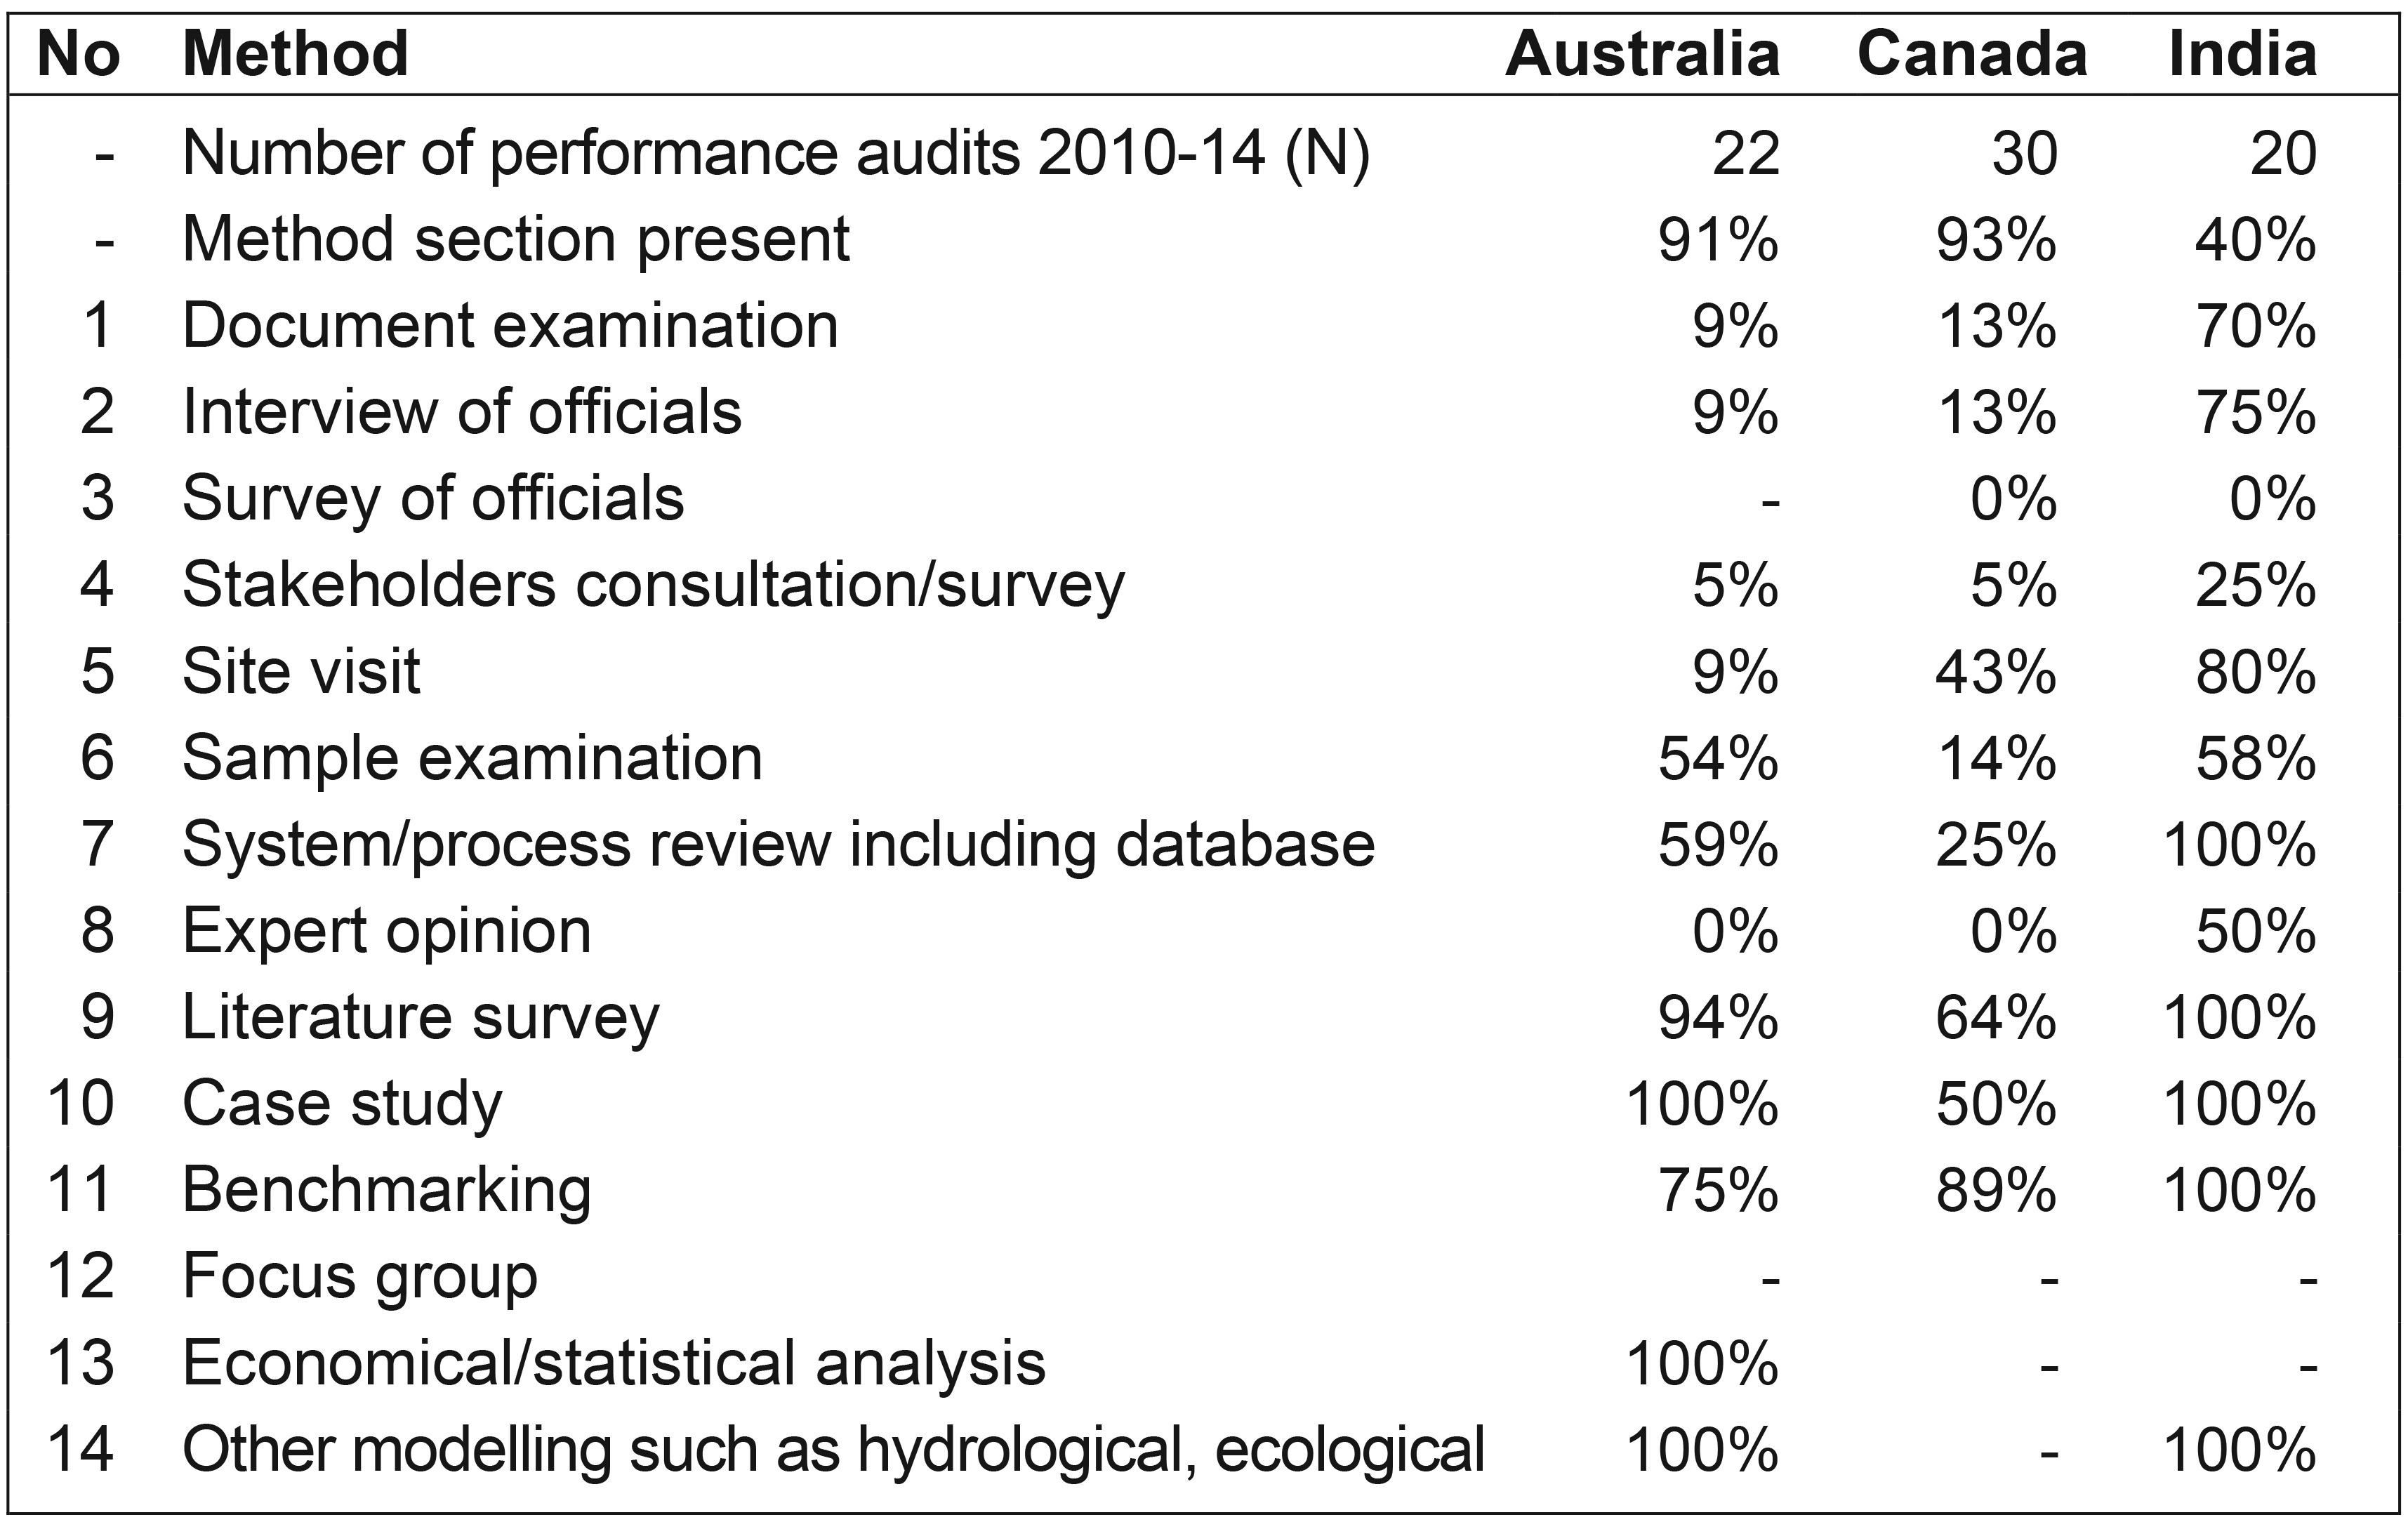 Table 1: Methods (% of audits) Interpreted as Used But Not Reported